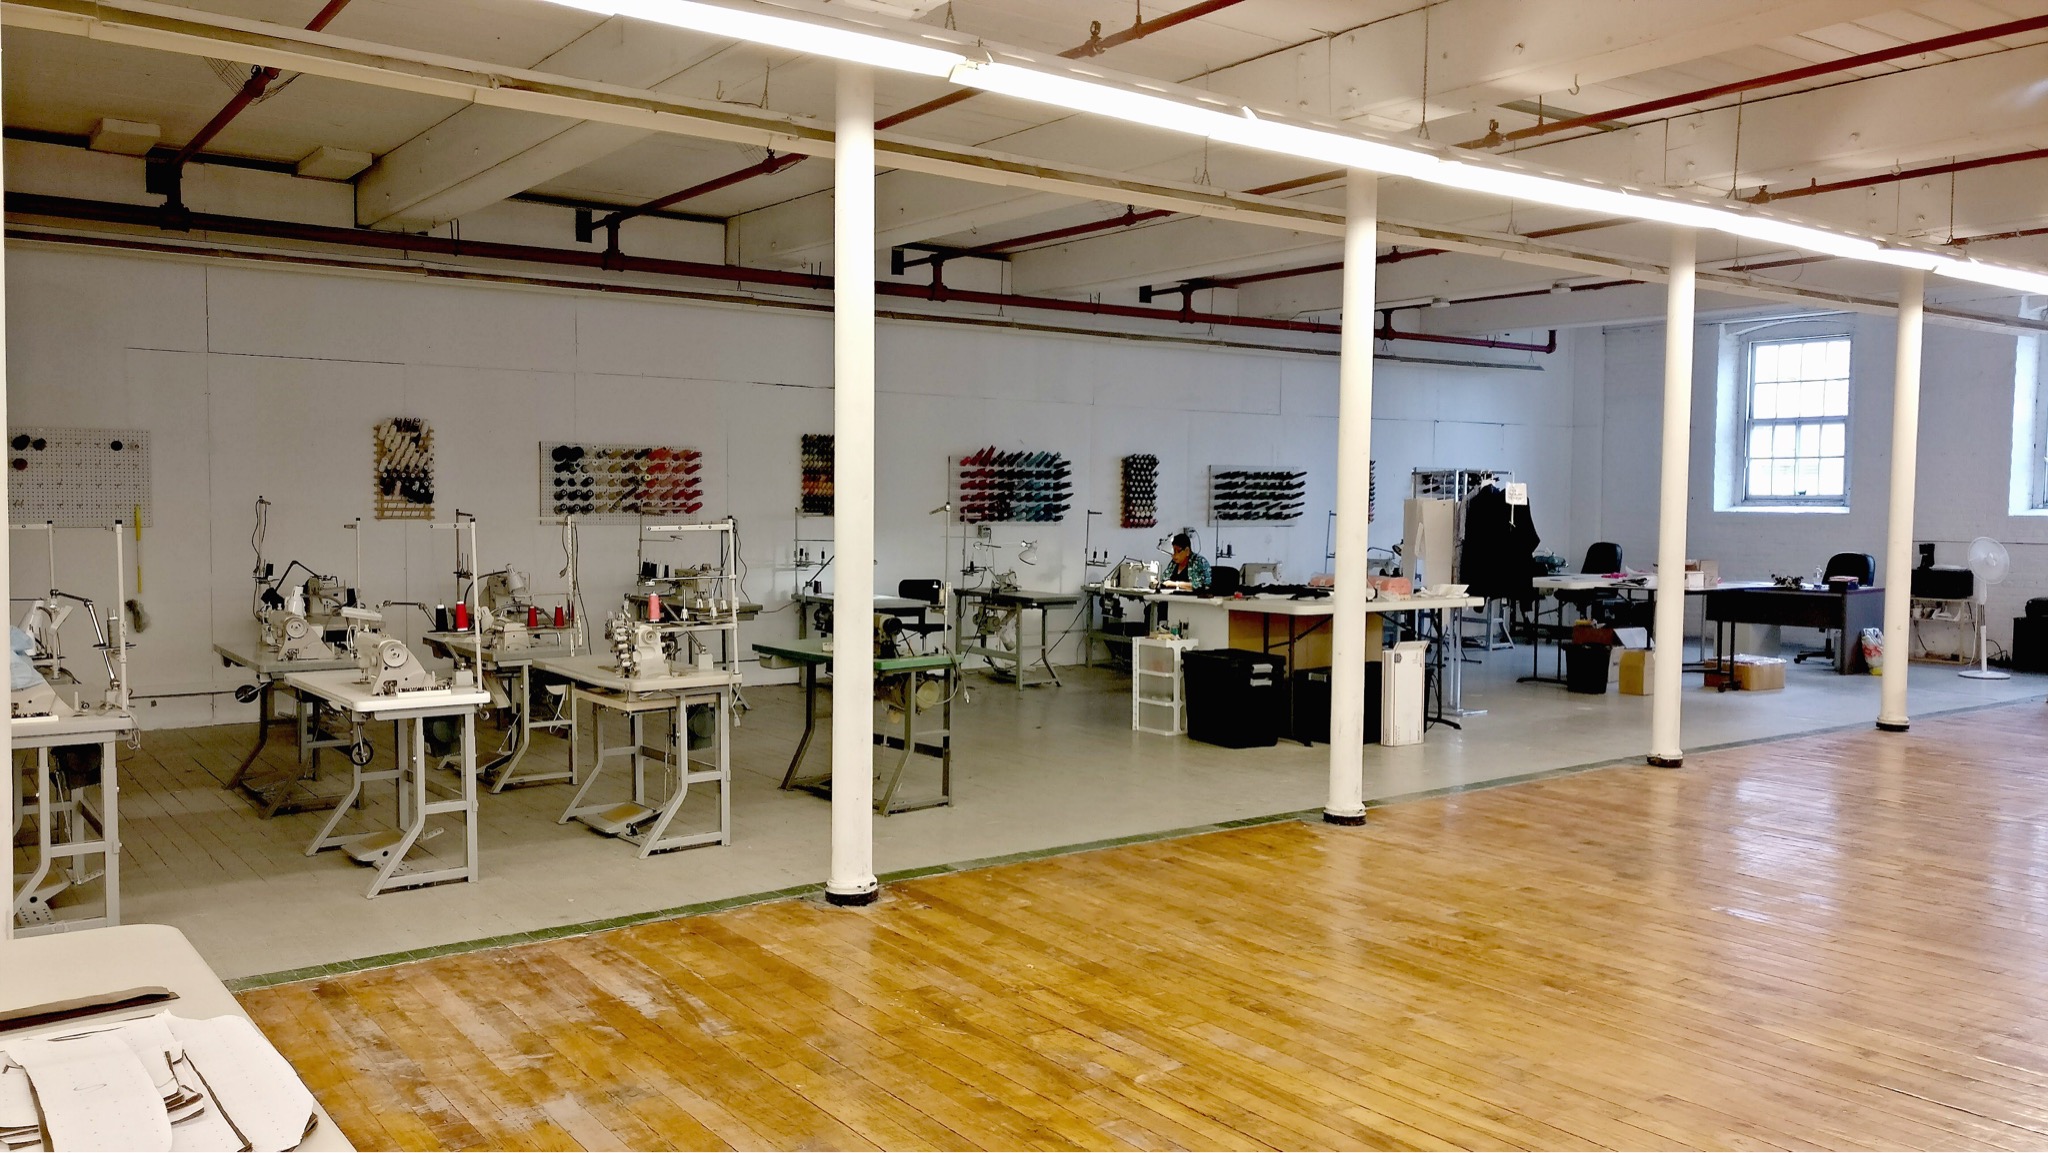 The interior of the clothing manufacturing floor